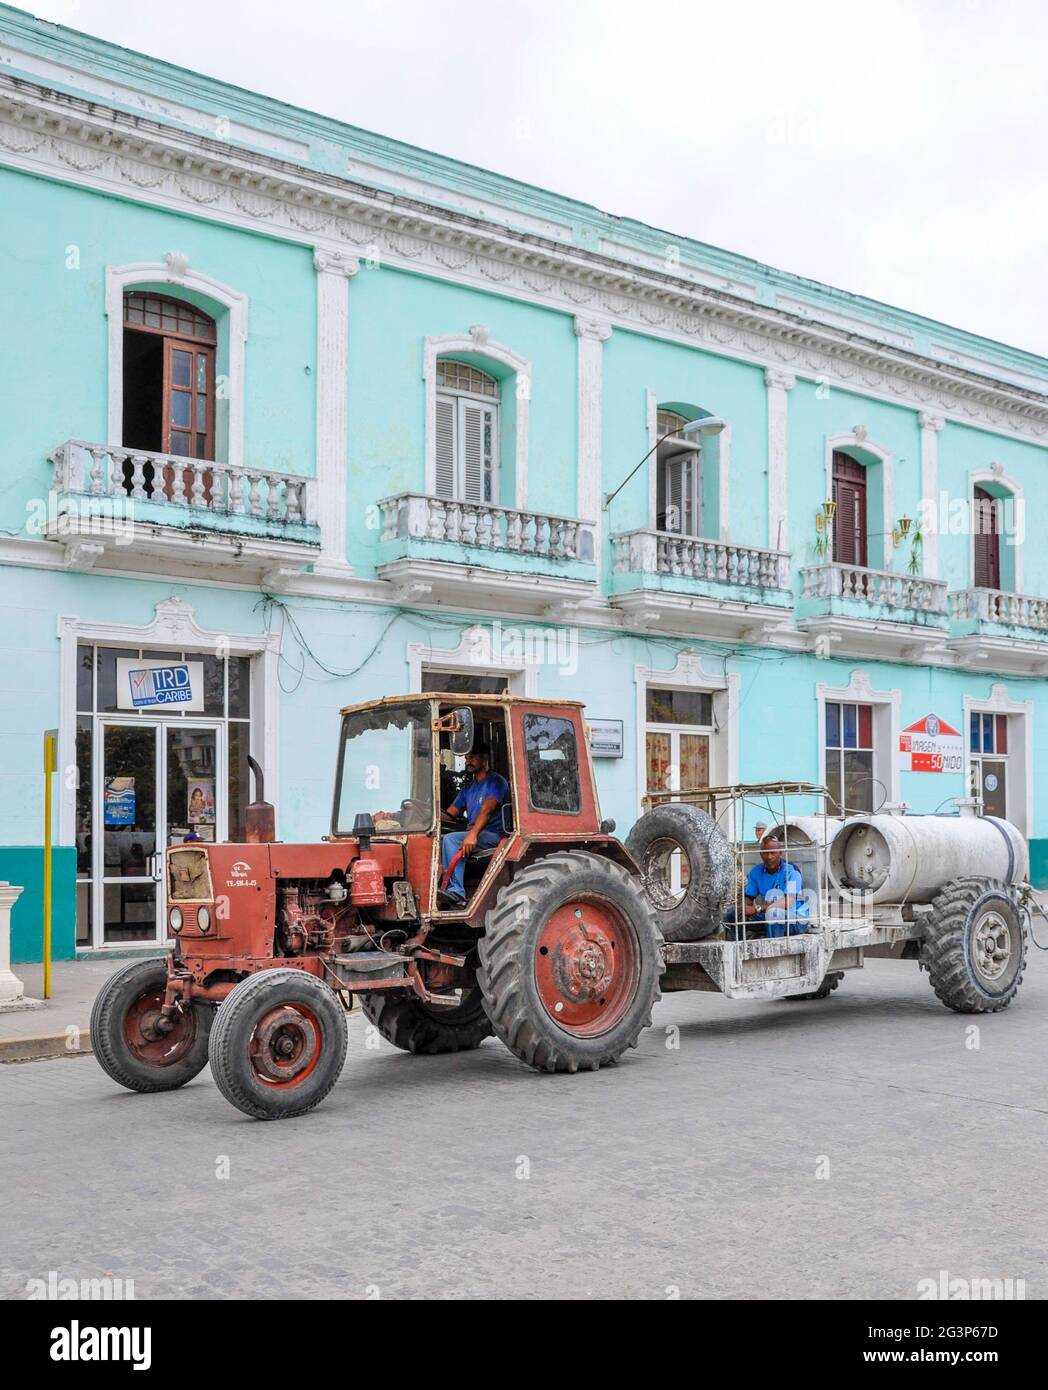 Cuban images: Old soviet tractor pulling a trailer on the street Cuban city Stock Photo